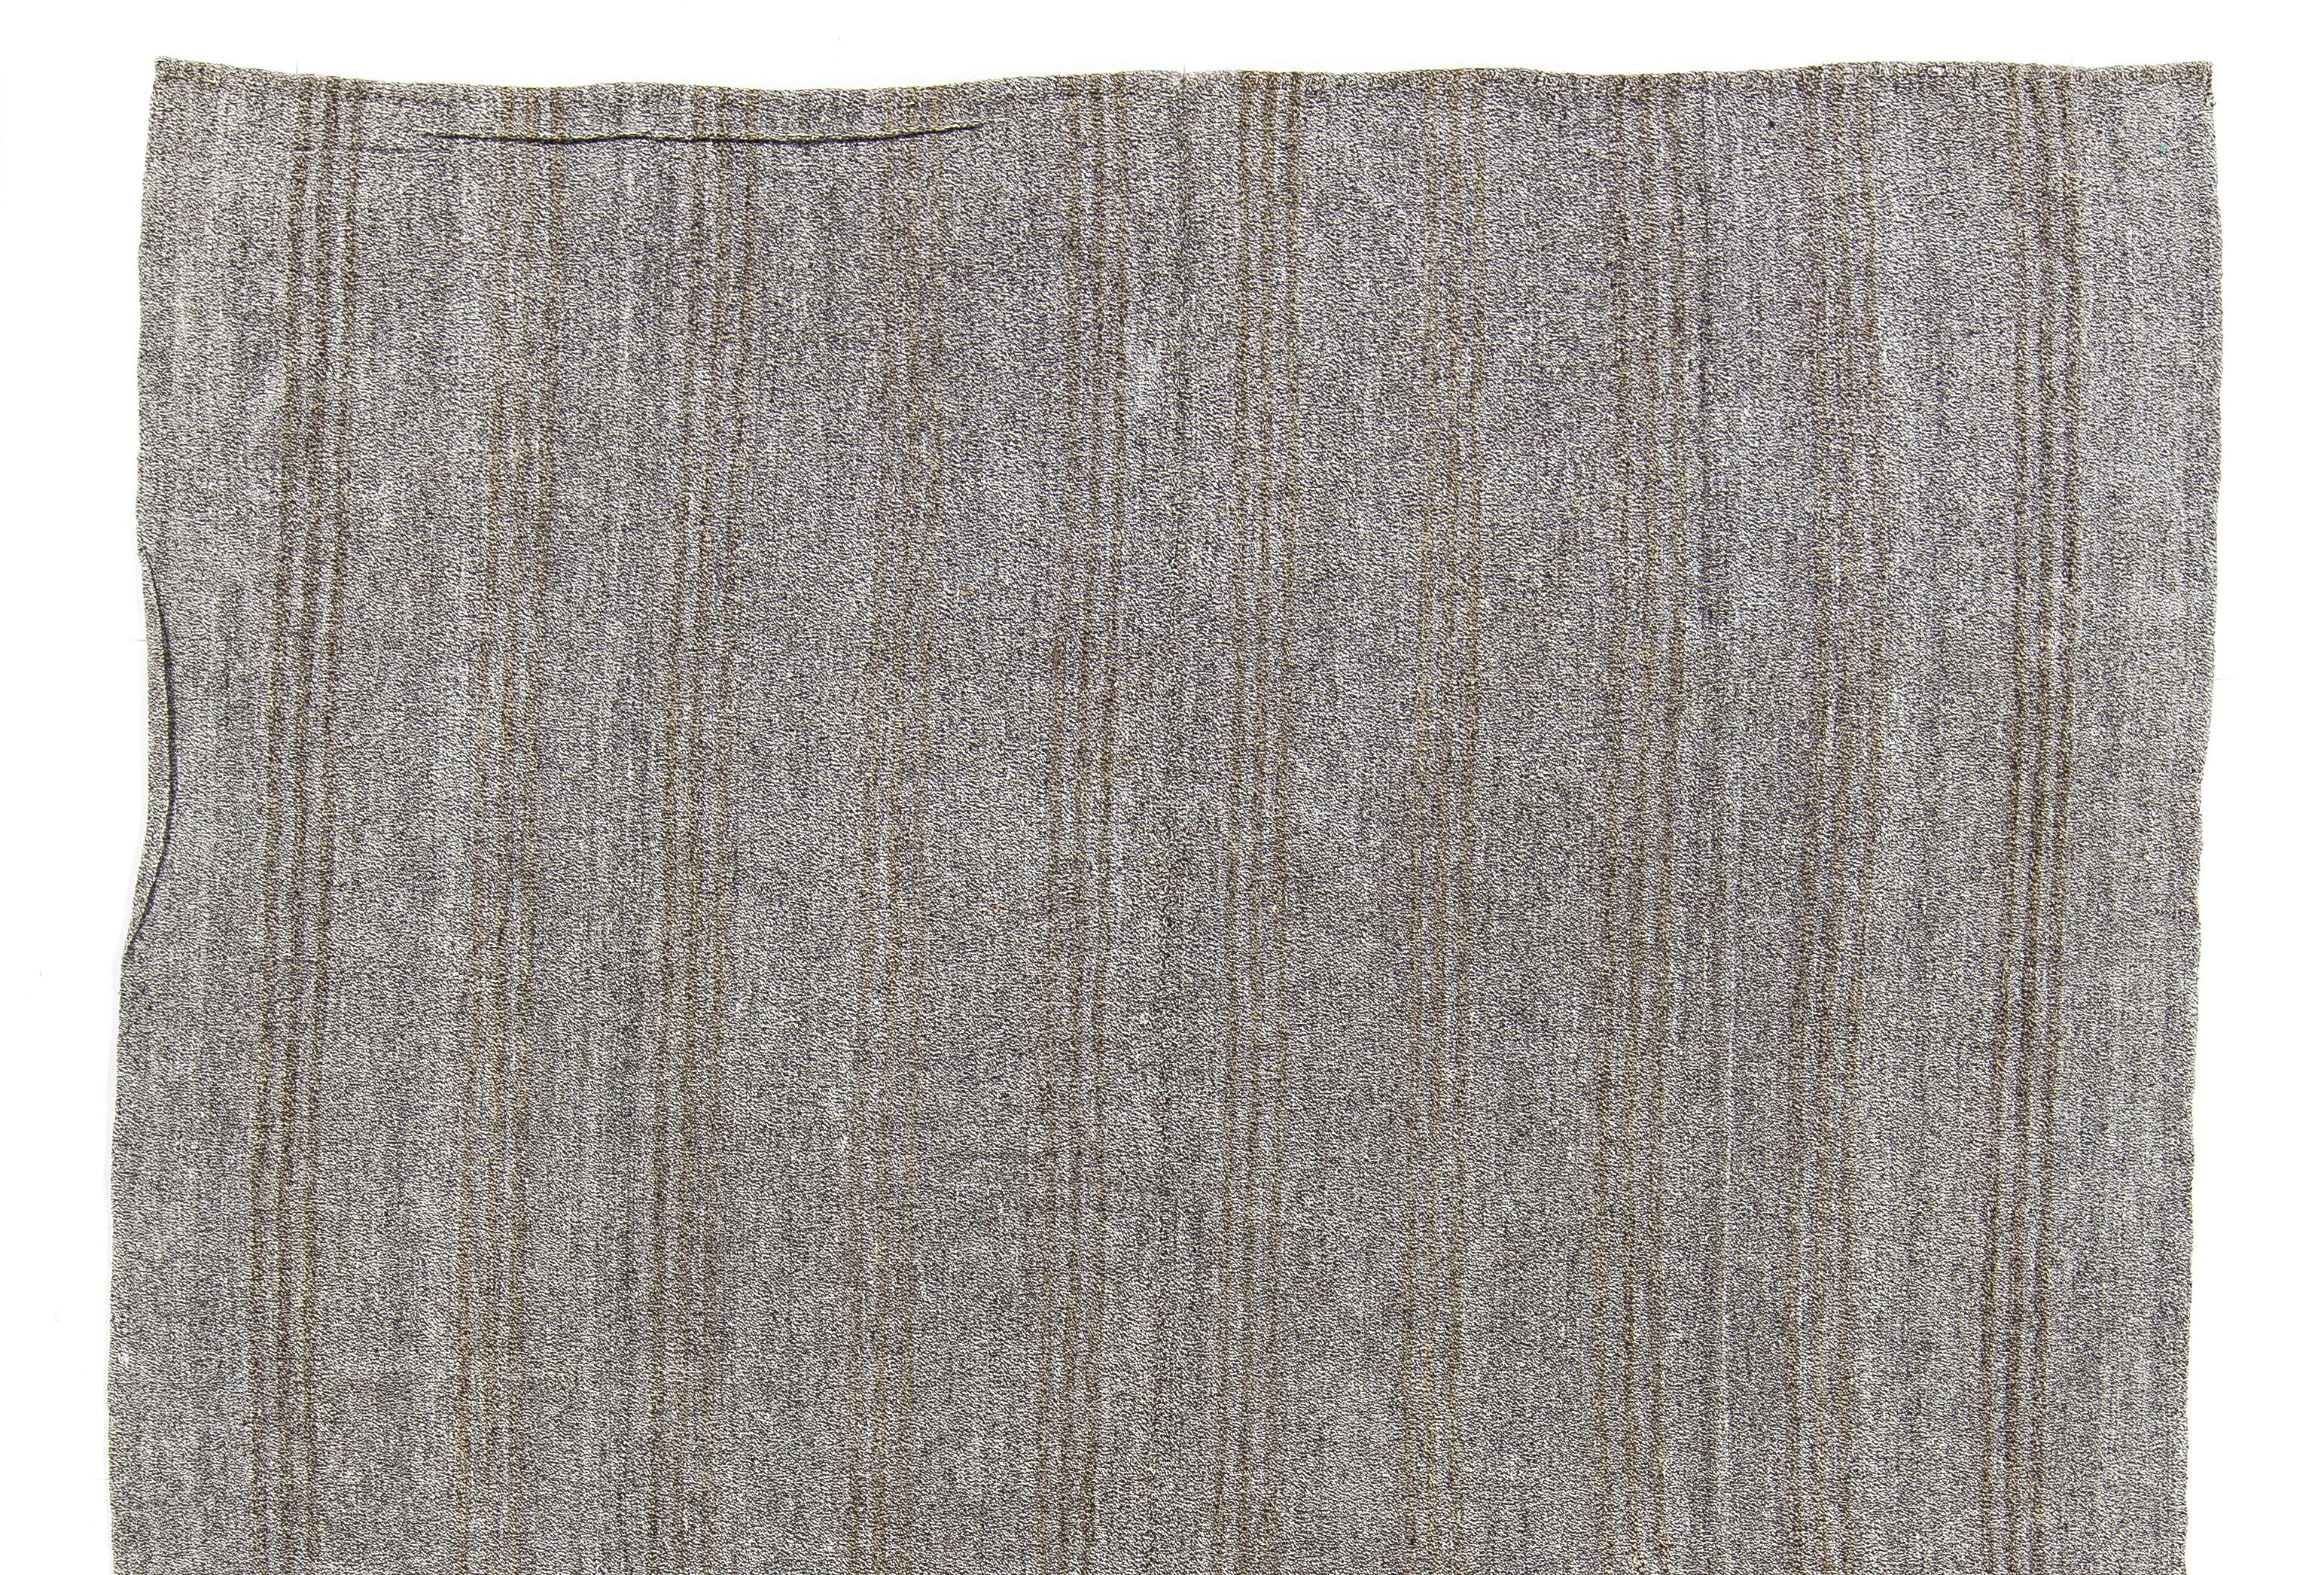 A beautiful handwoven East Anatolian Kilim (flat-weave) with a simple design in a soothing, neutral palette of gray and greenish brown. In very good condition, sturdy and clean, finely-woven, suitable for everyday traffic.